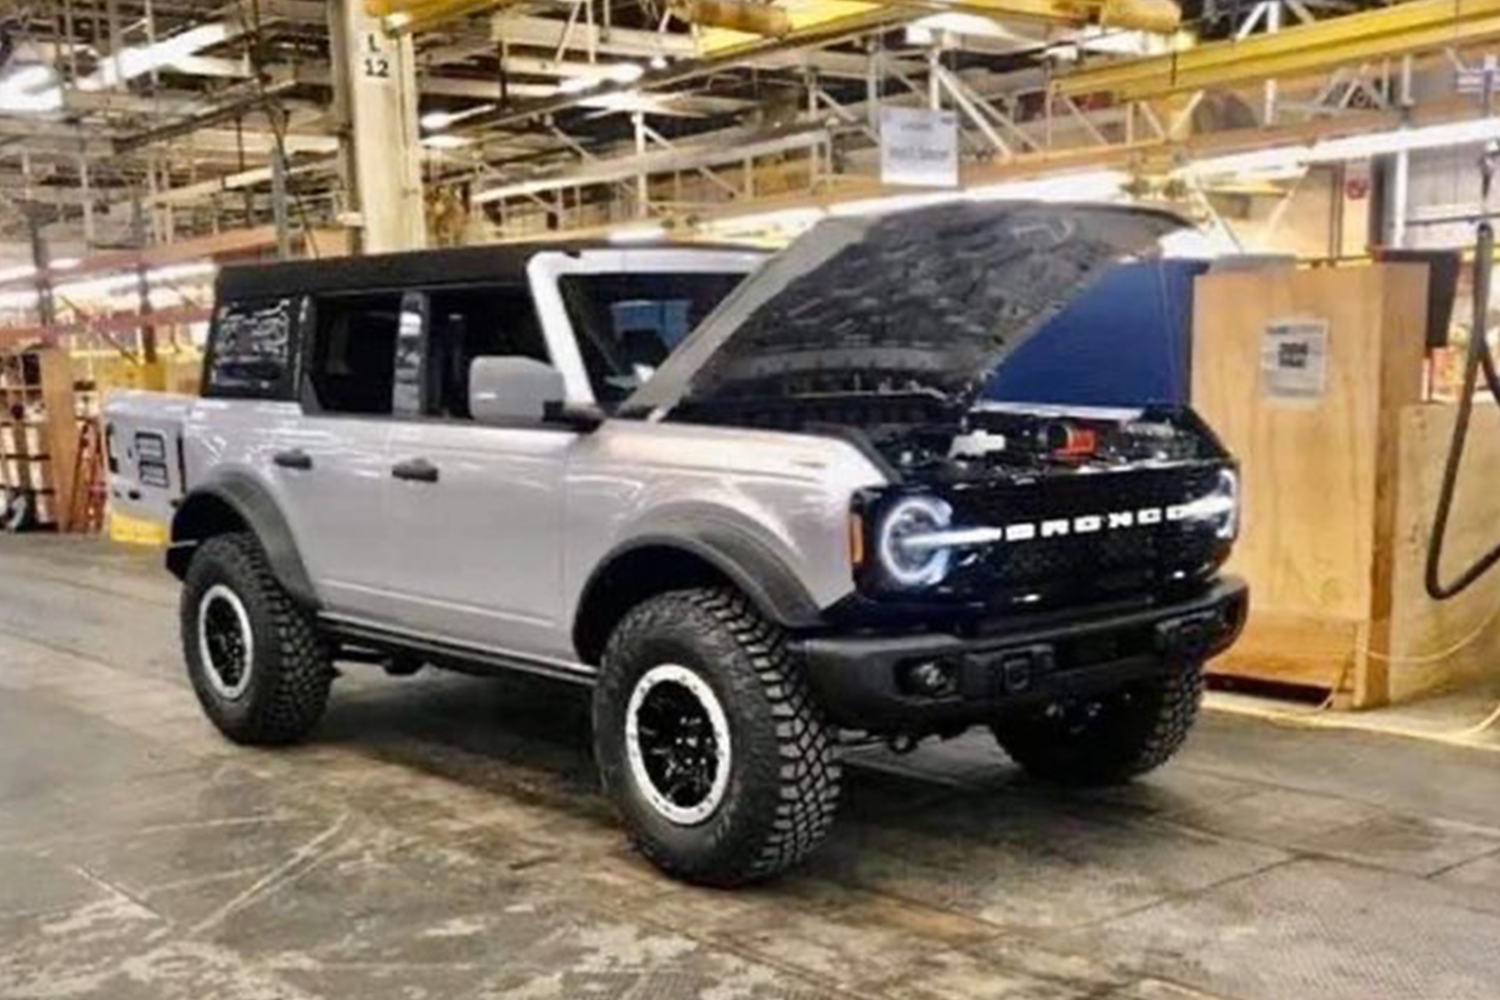 Leaked photo of a new white SUV